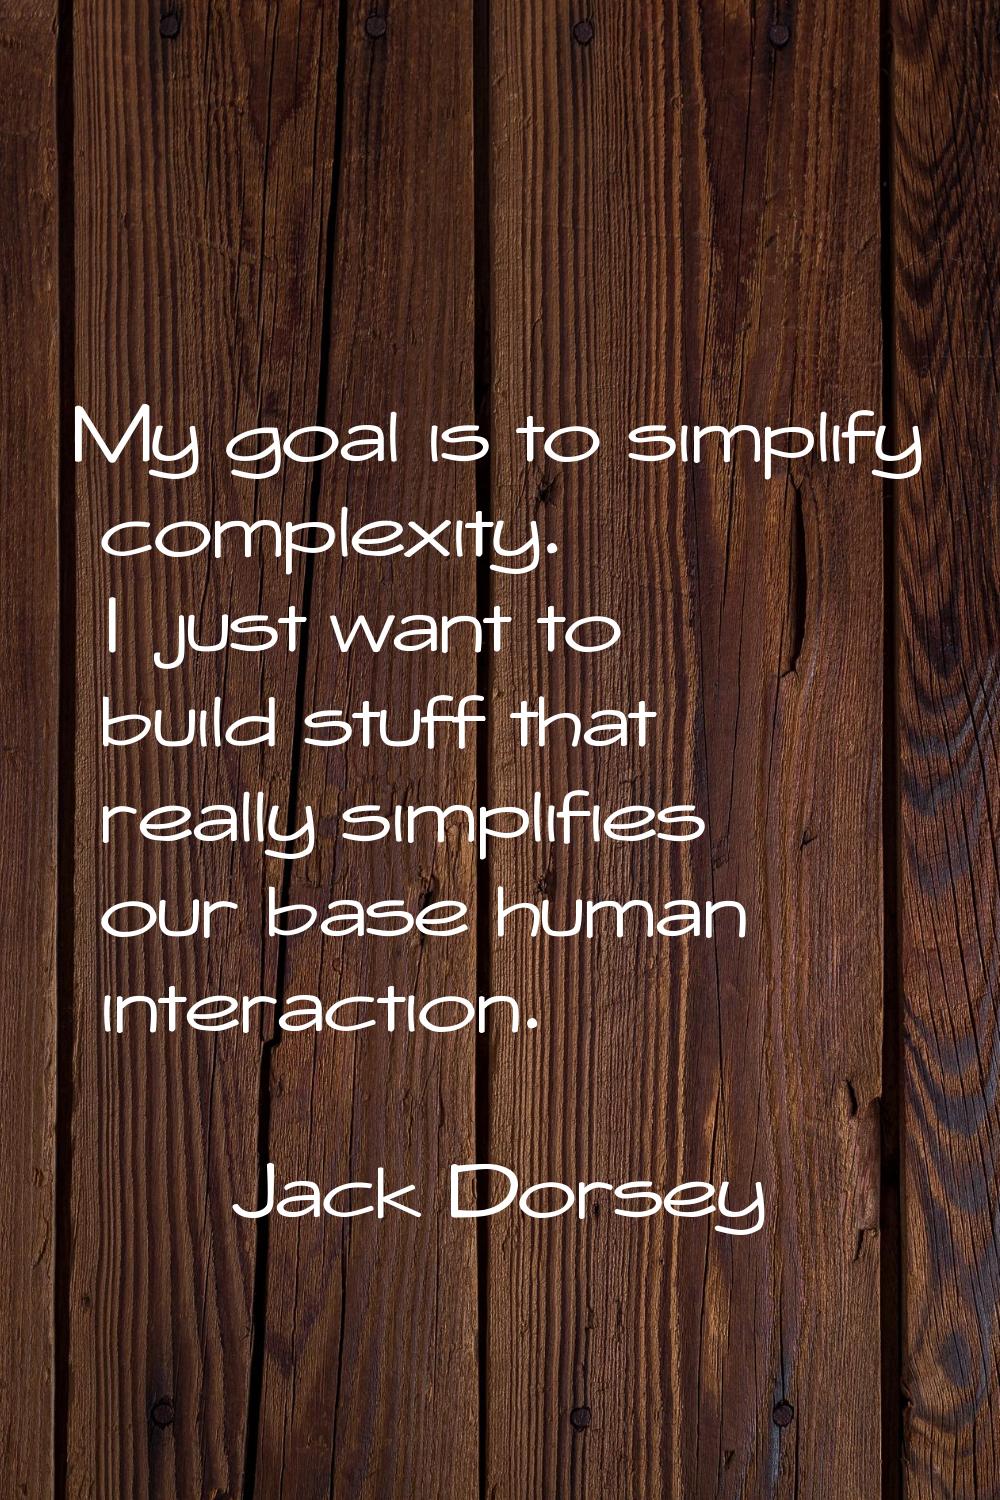 My goal is to simplify complexity. I just want to build stuff that really simplifies our base human